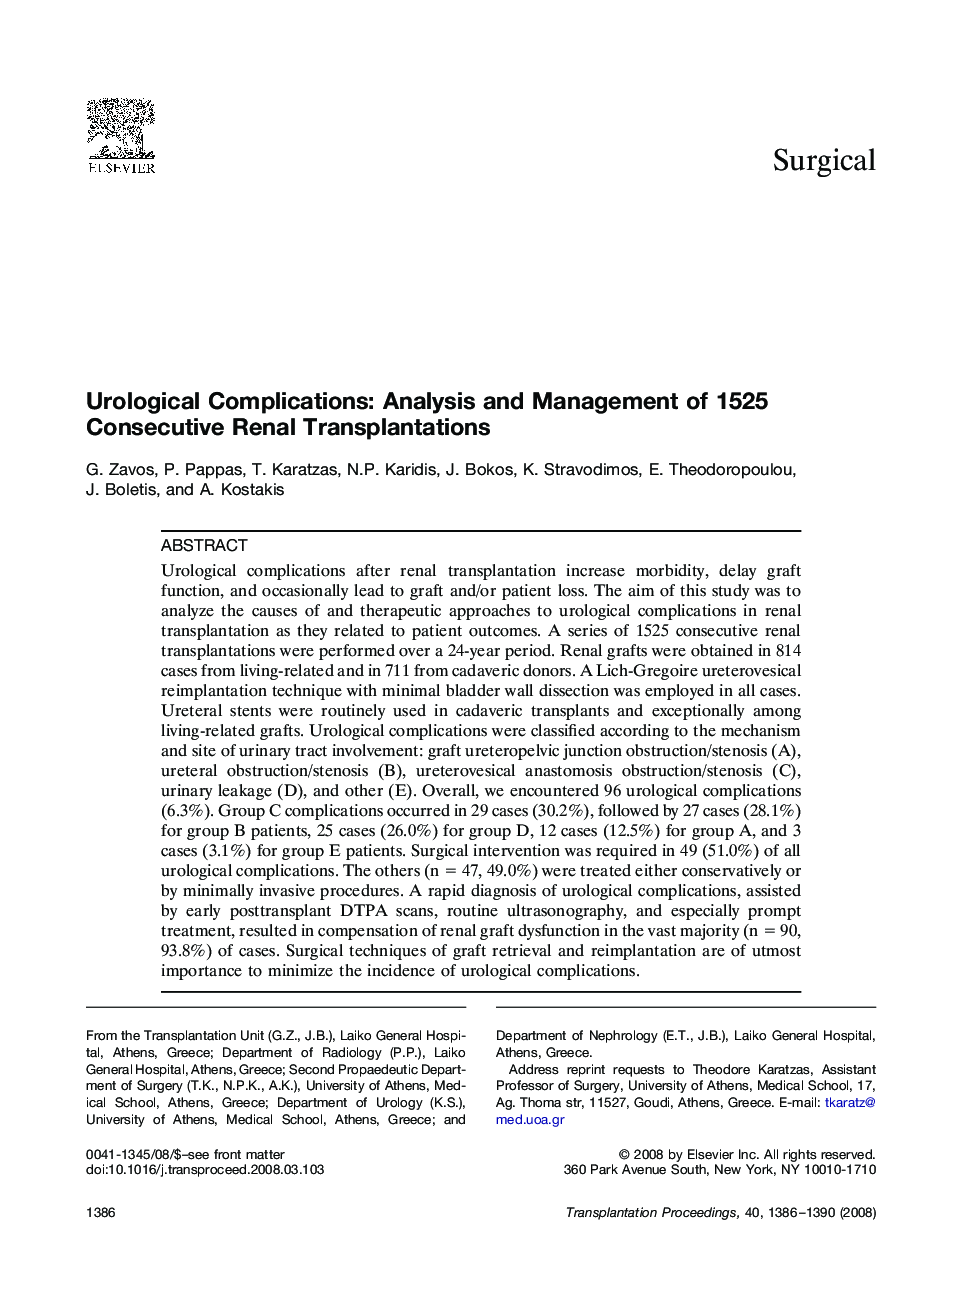 Urological Complications: Analysis and Management of 1525 Consecutive Renal Transplantations